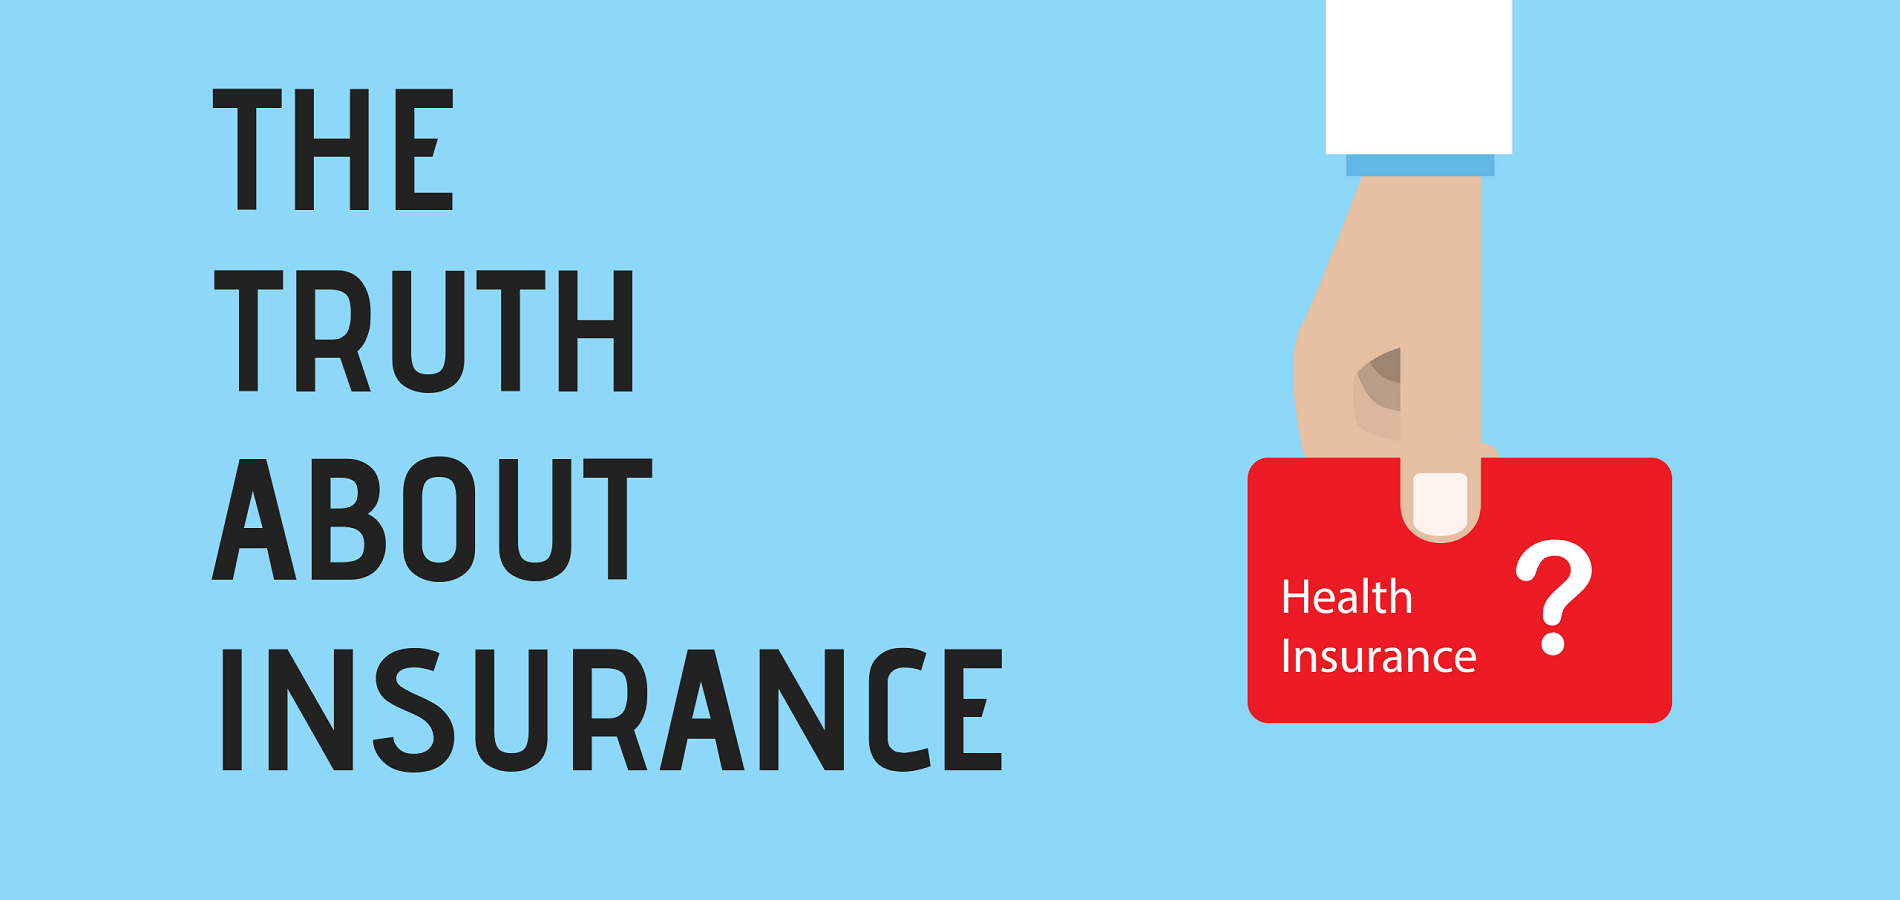 The truth about health insurance for small business in Canada